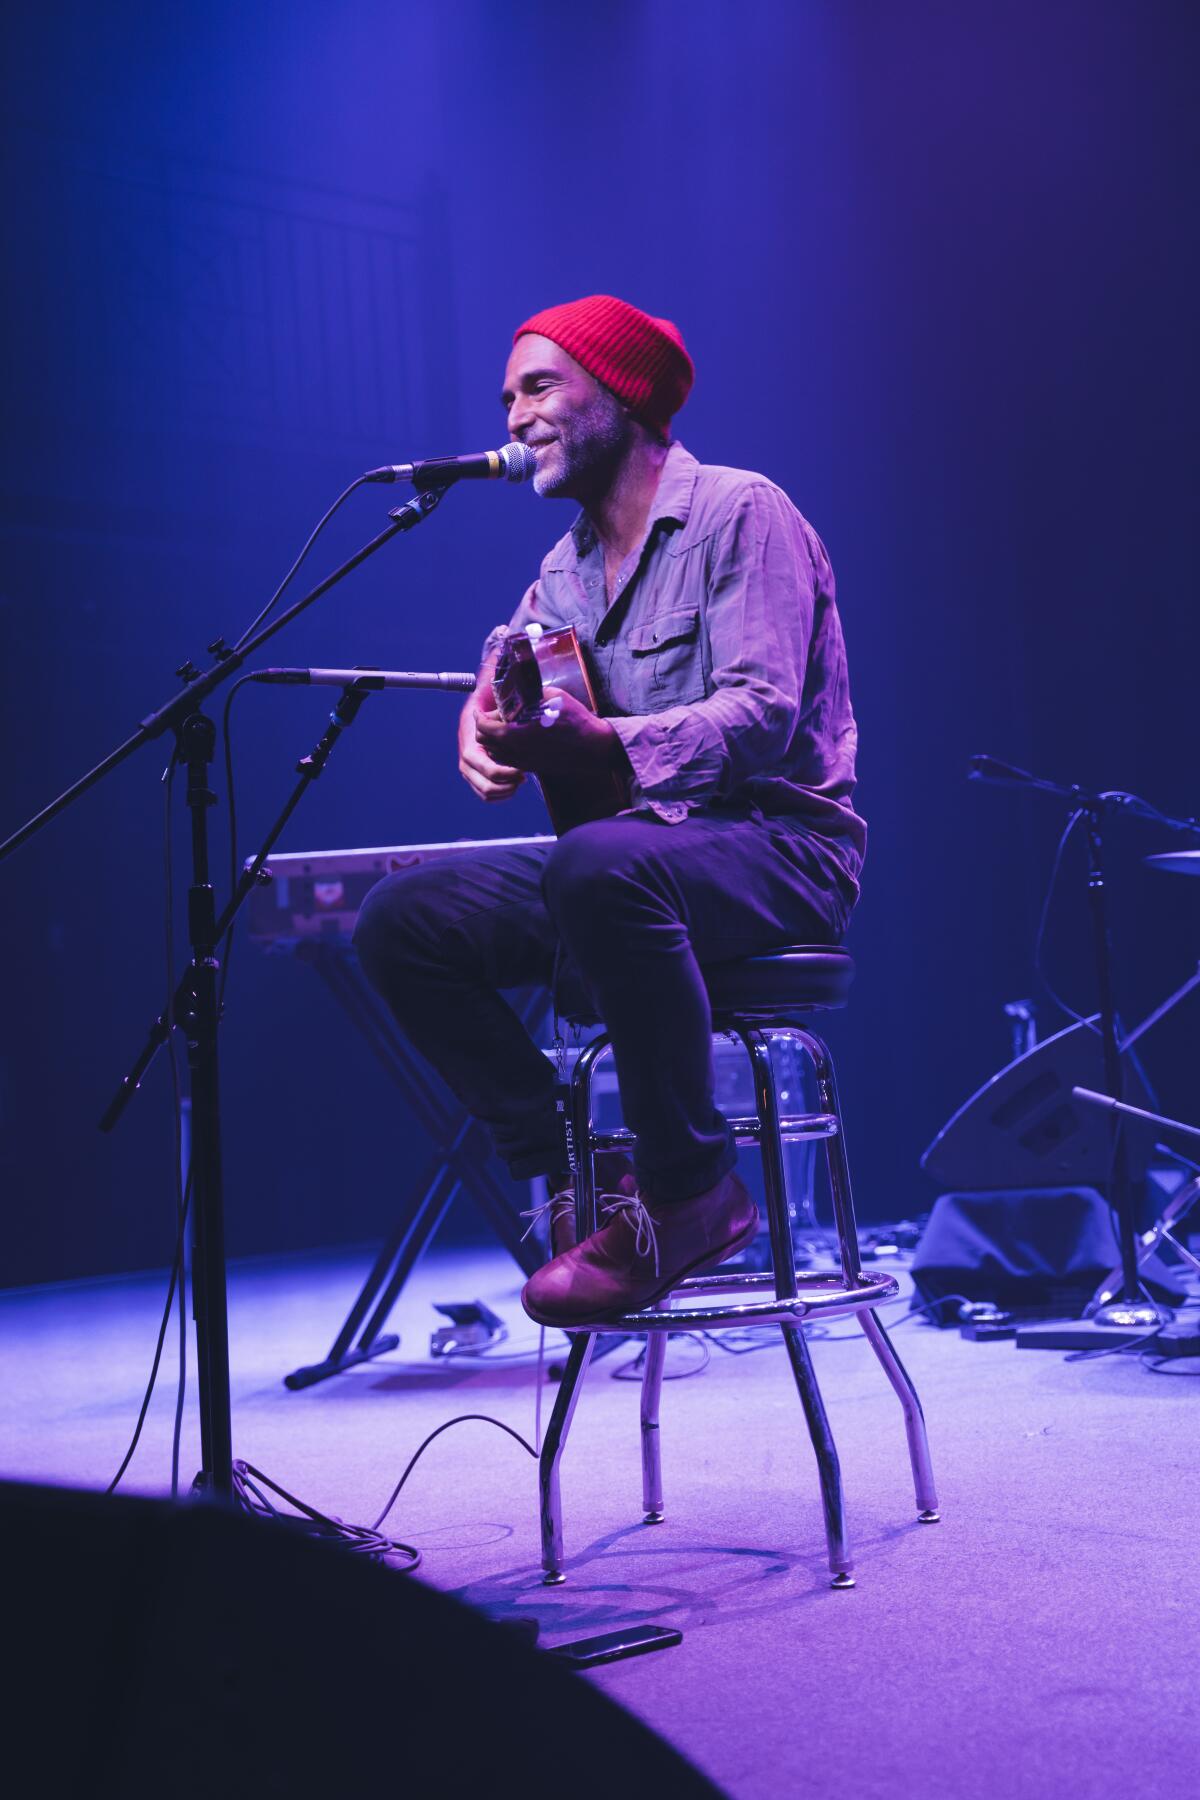 A man in a red wool cap seated on a stool sings and plays acoustic guitar.